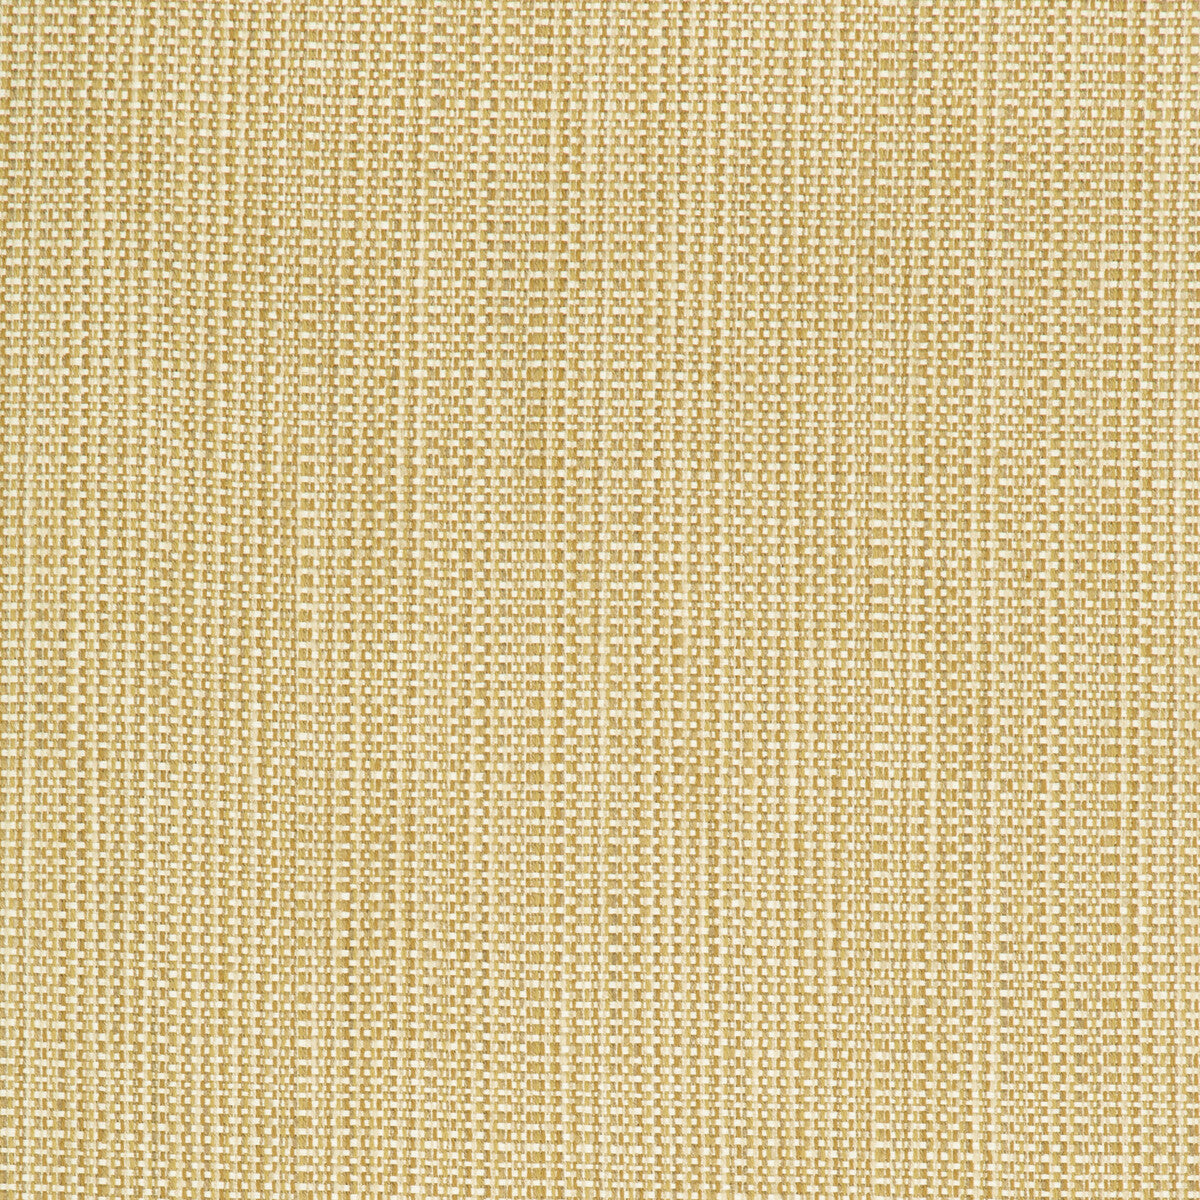 Kravet Contract fabric in 34634-416 color - pattern 34634.416.0 - by Kravet Contract in the Crypton Incase collection